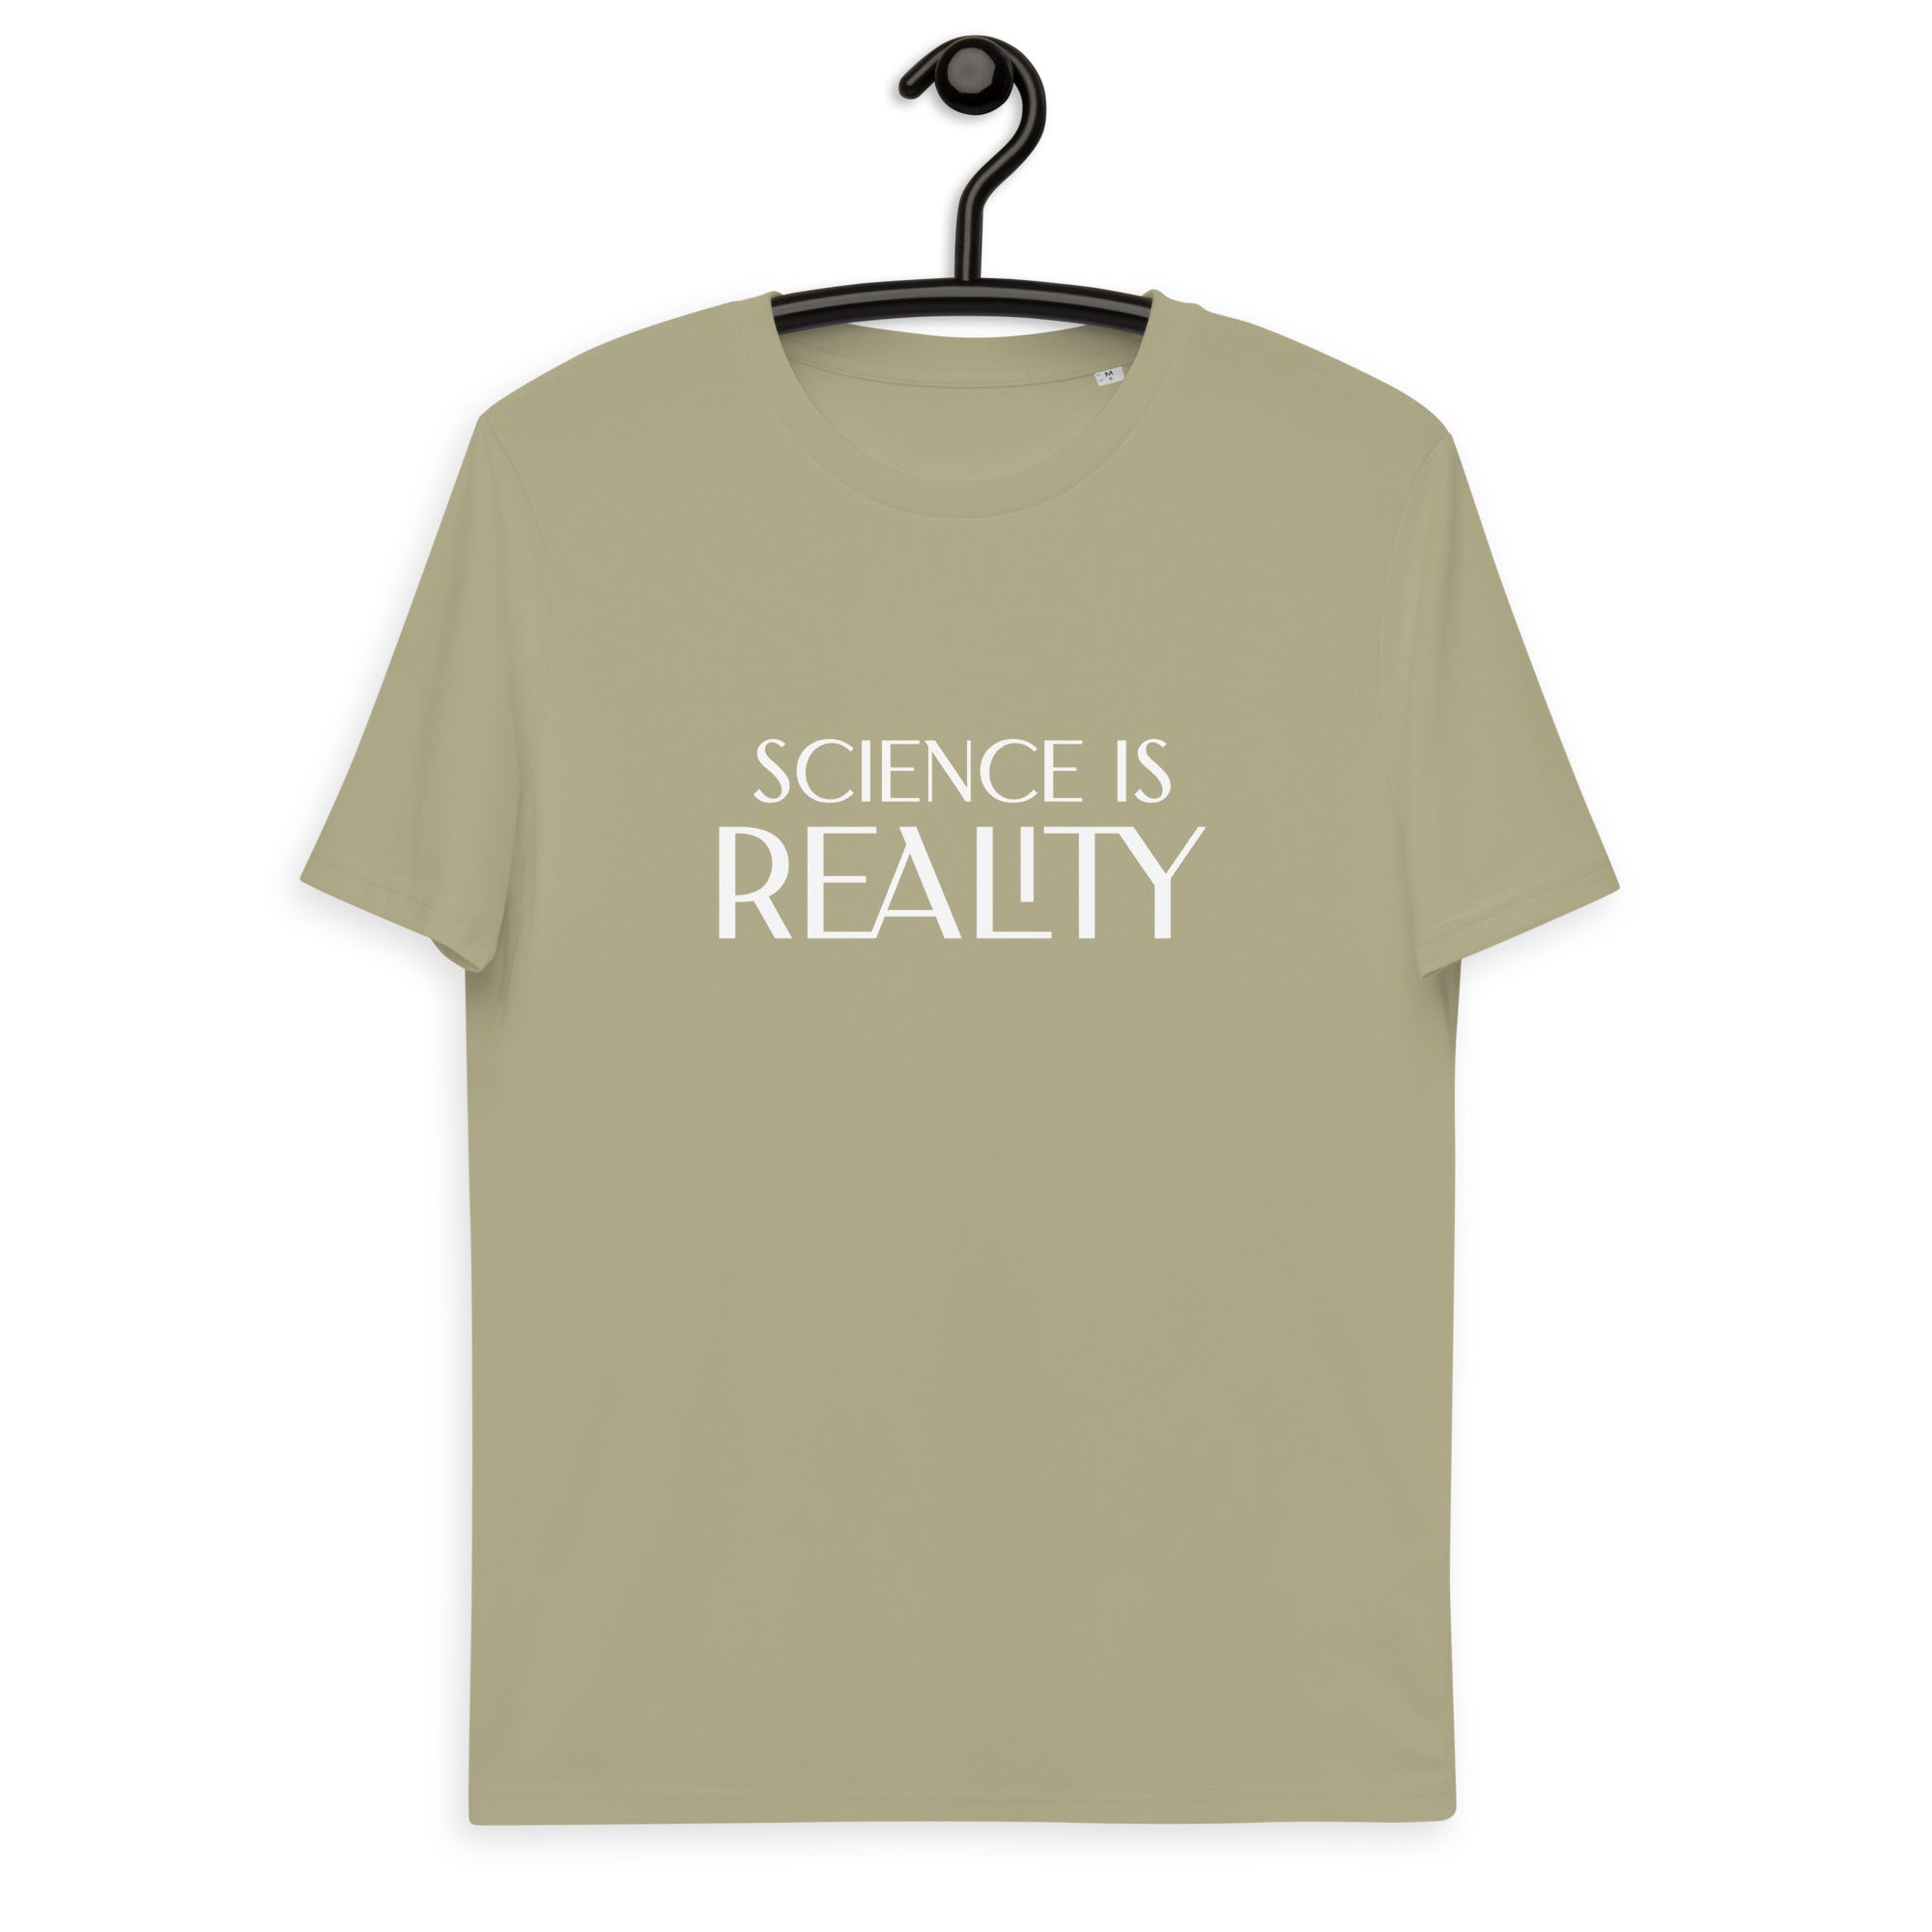 science is reality cotton t-shirt.